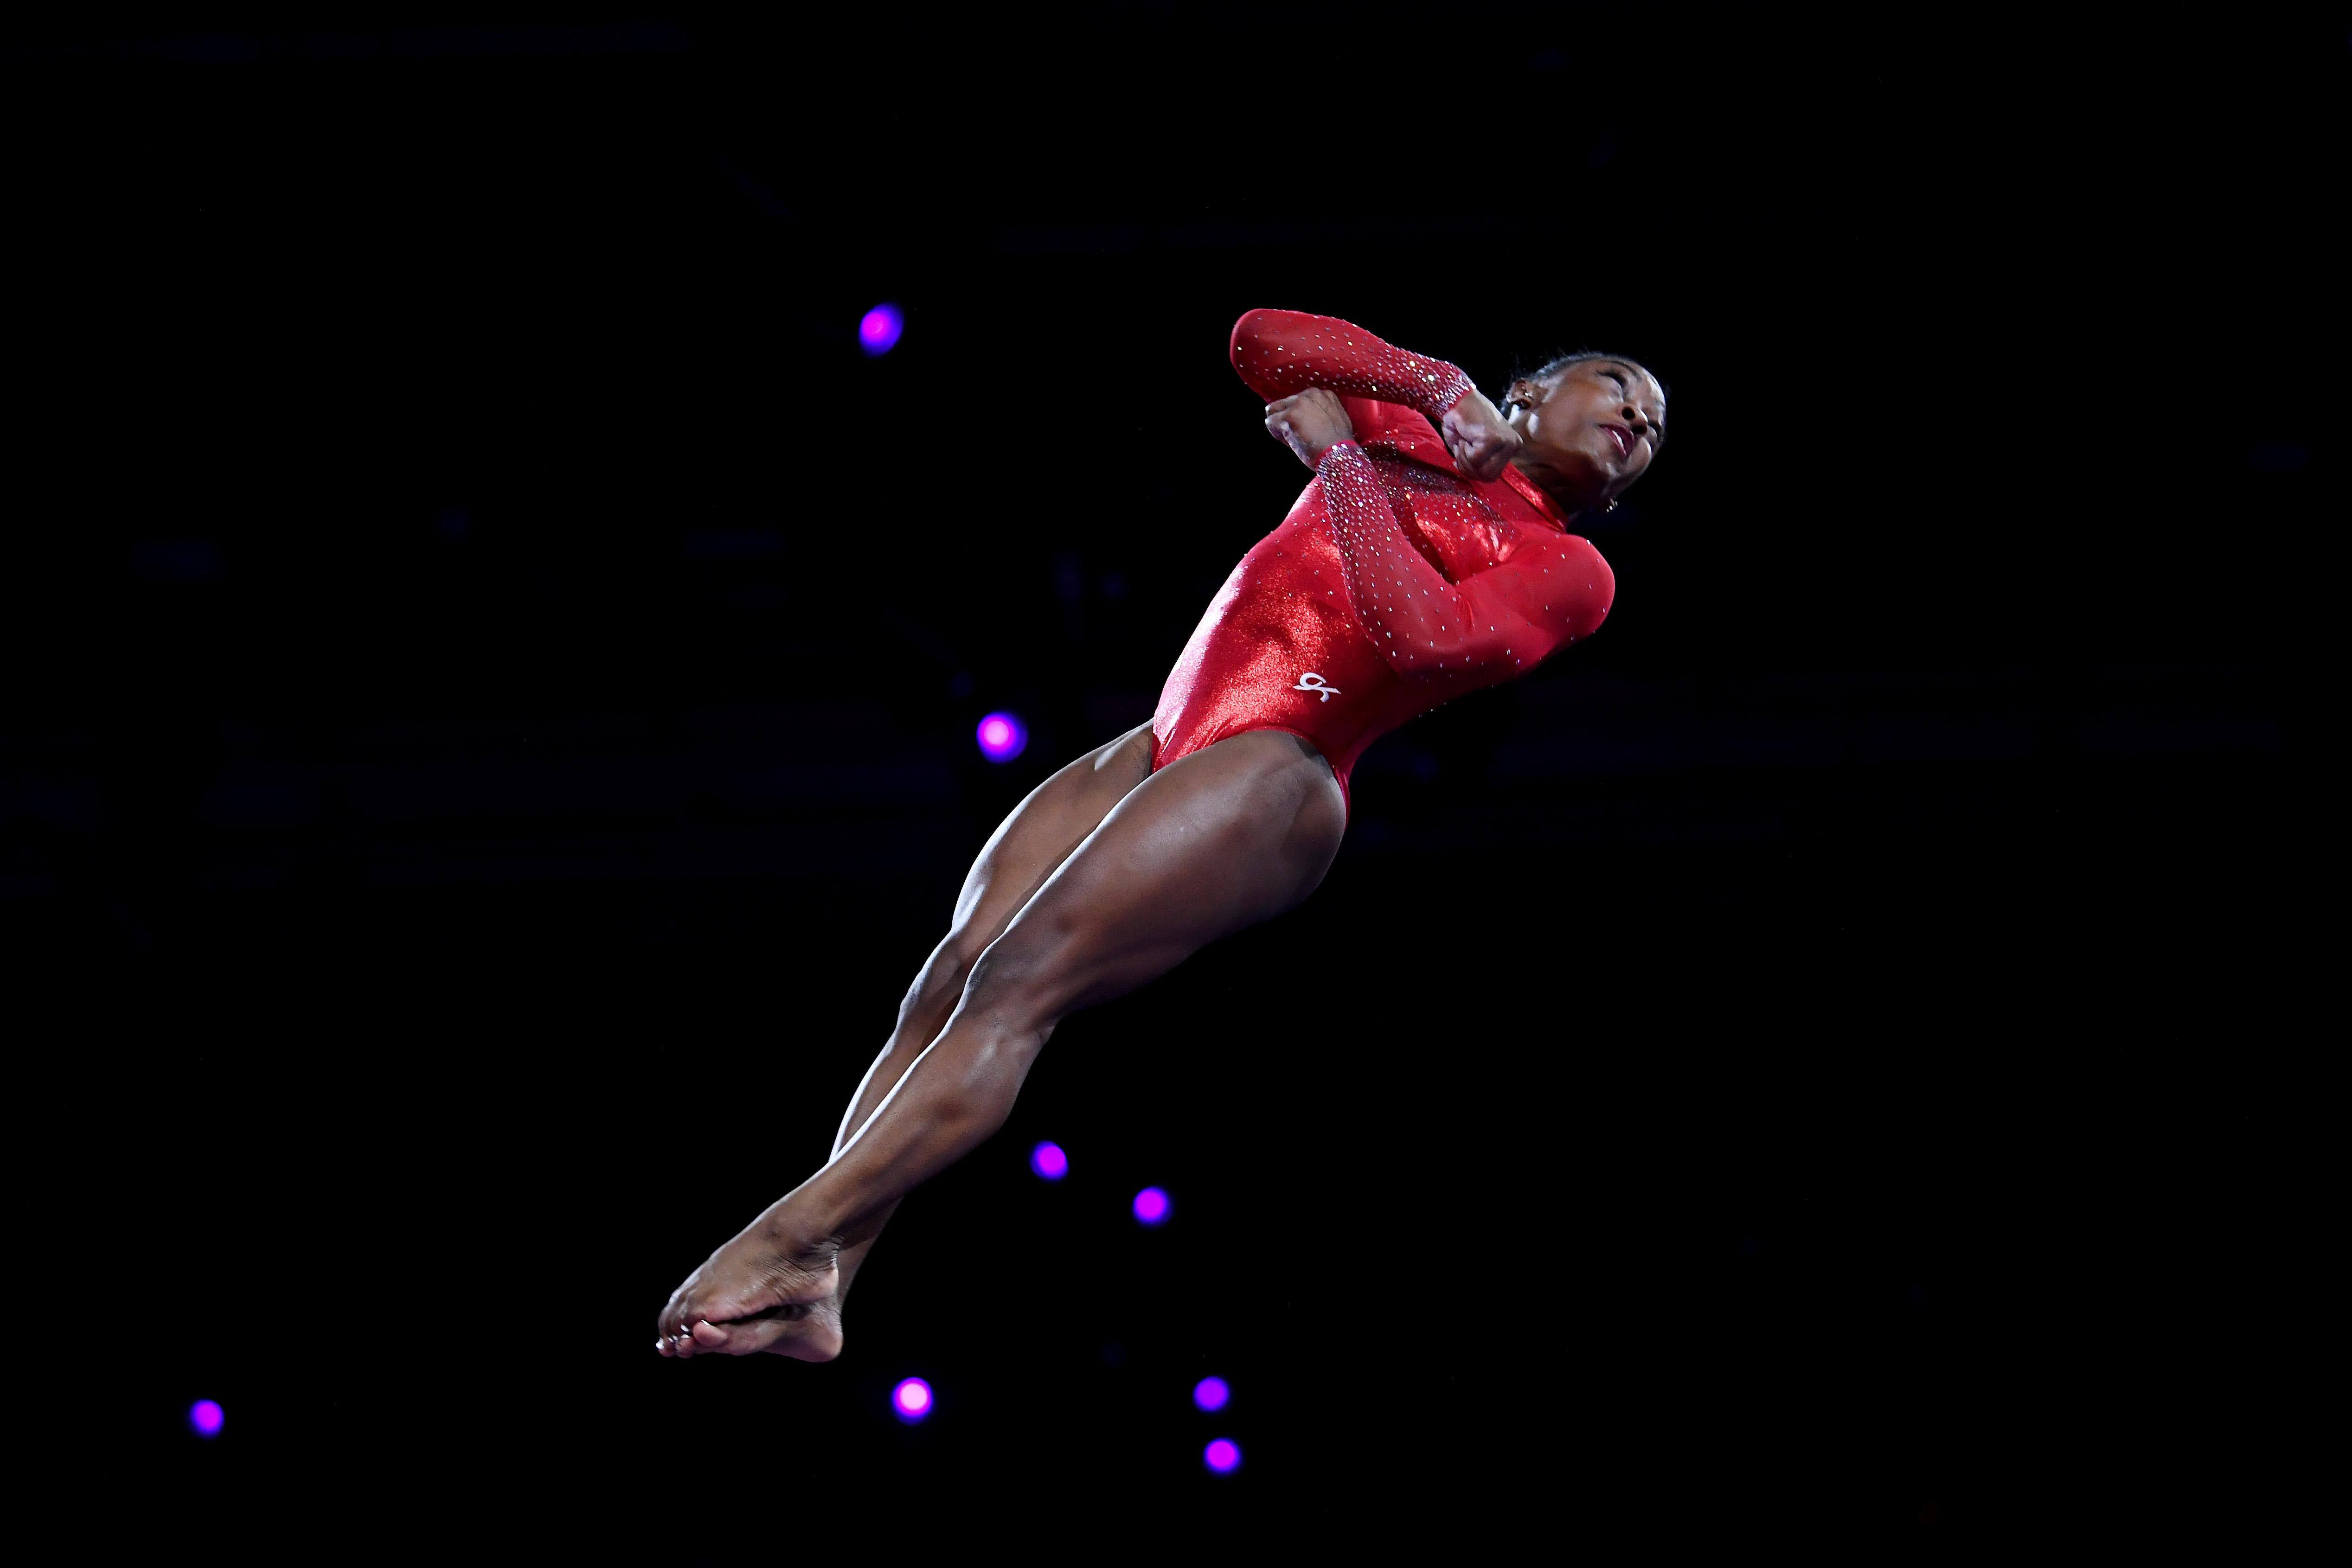 Simone Biles twisting in the air against a black background as she vaults.